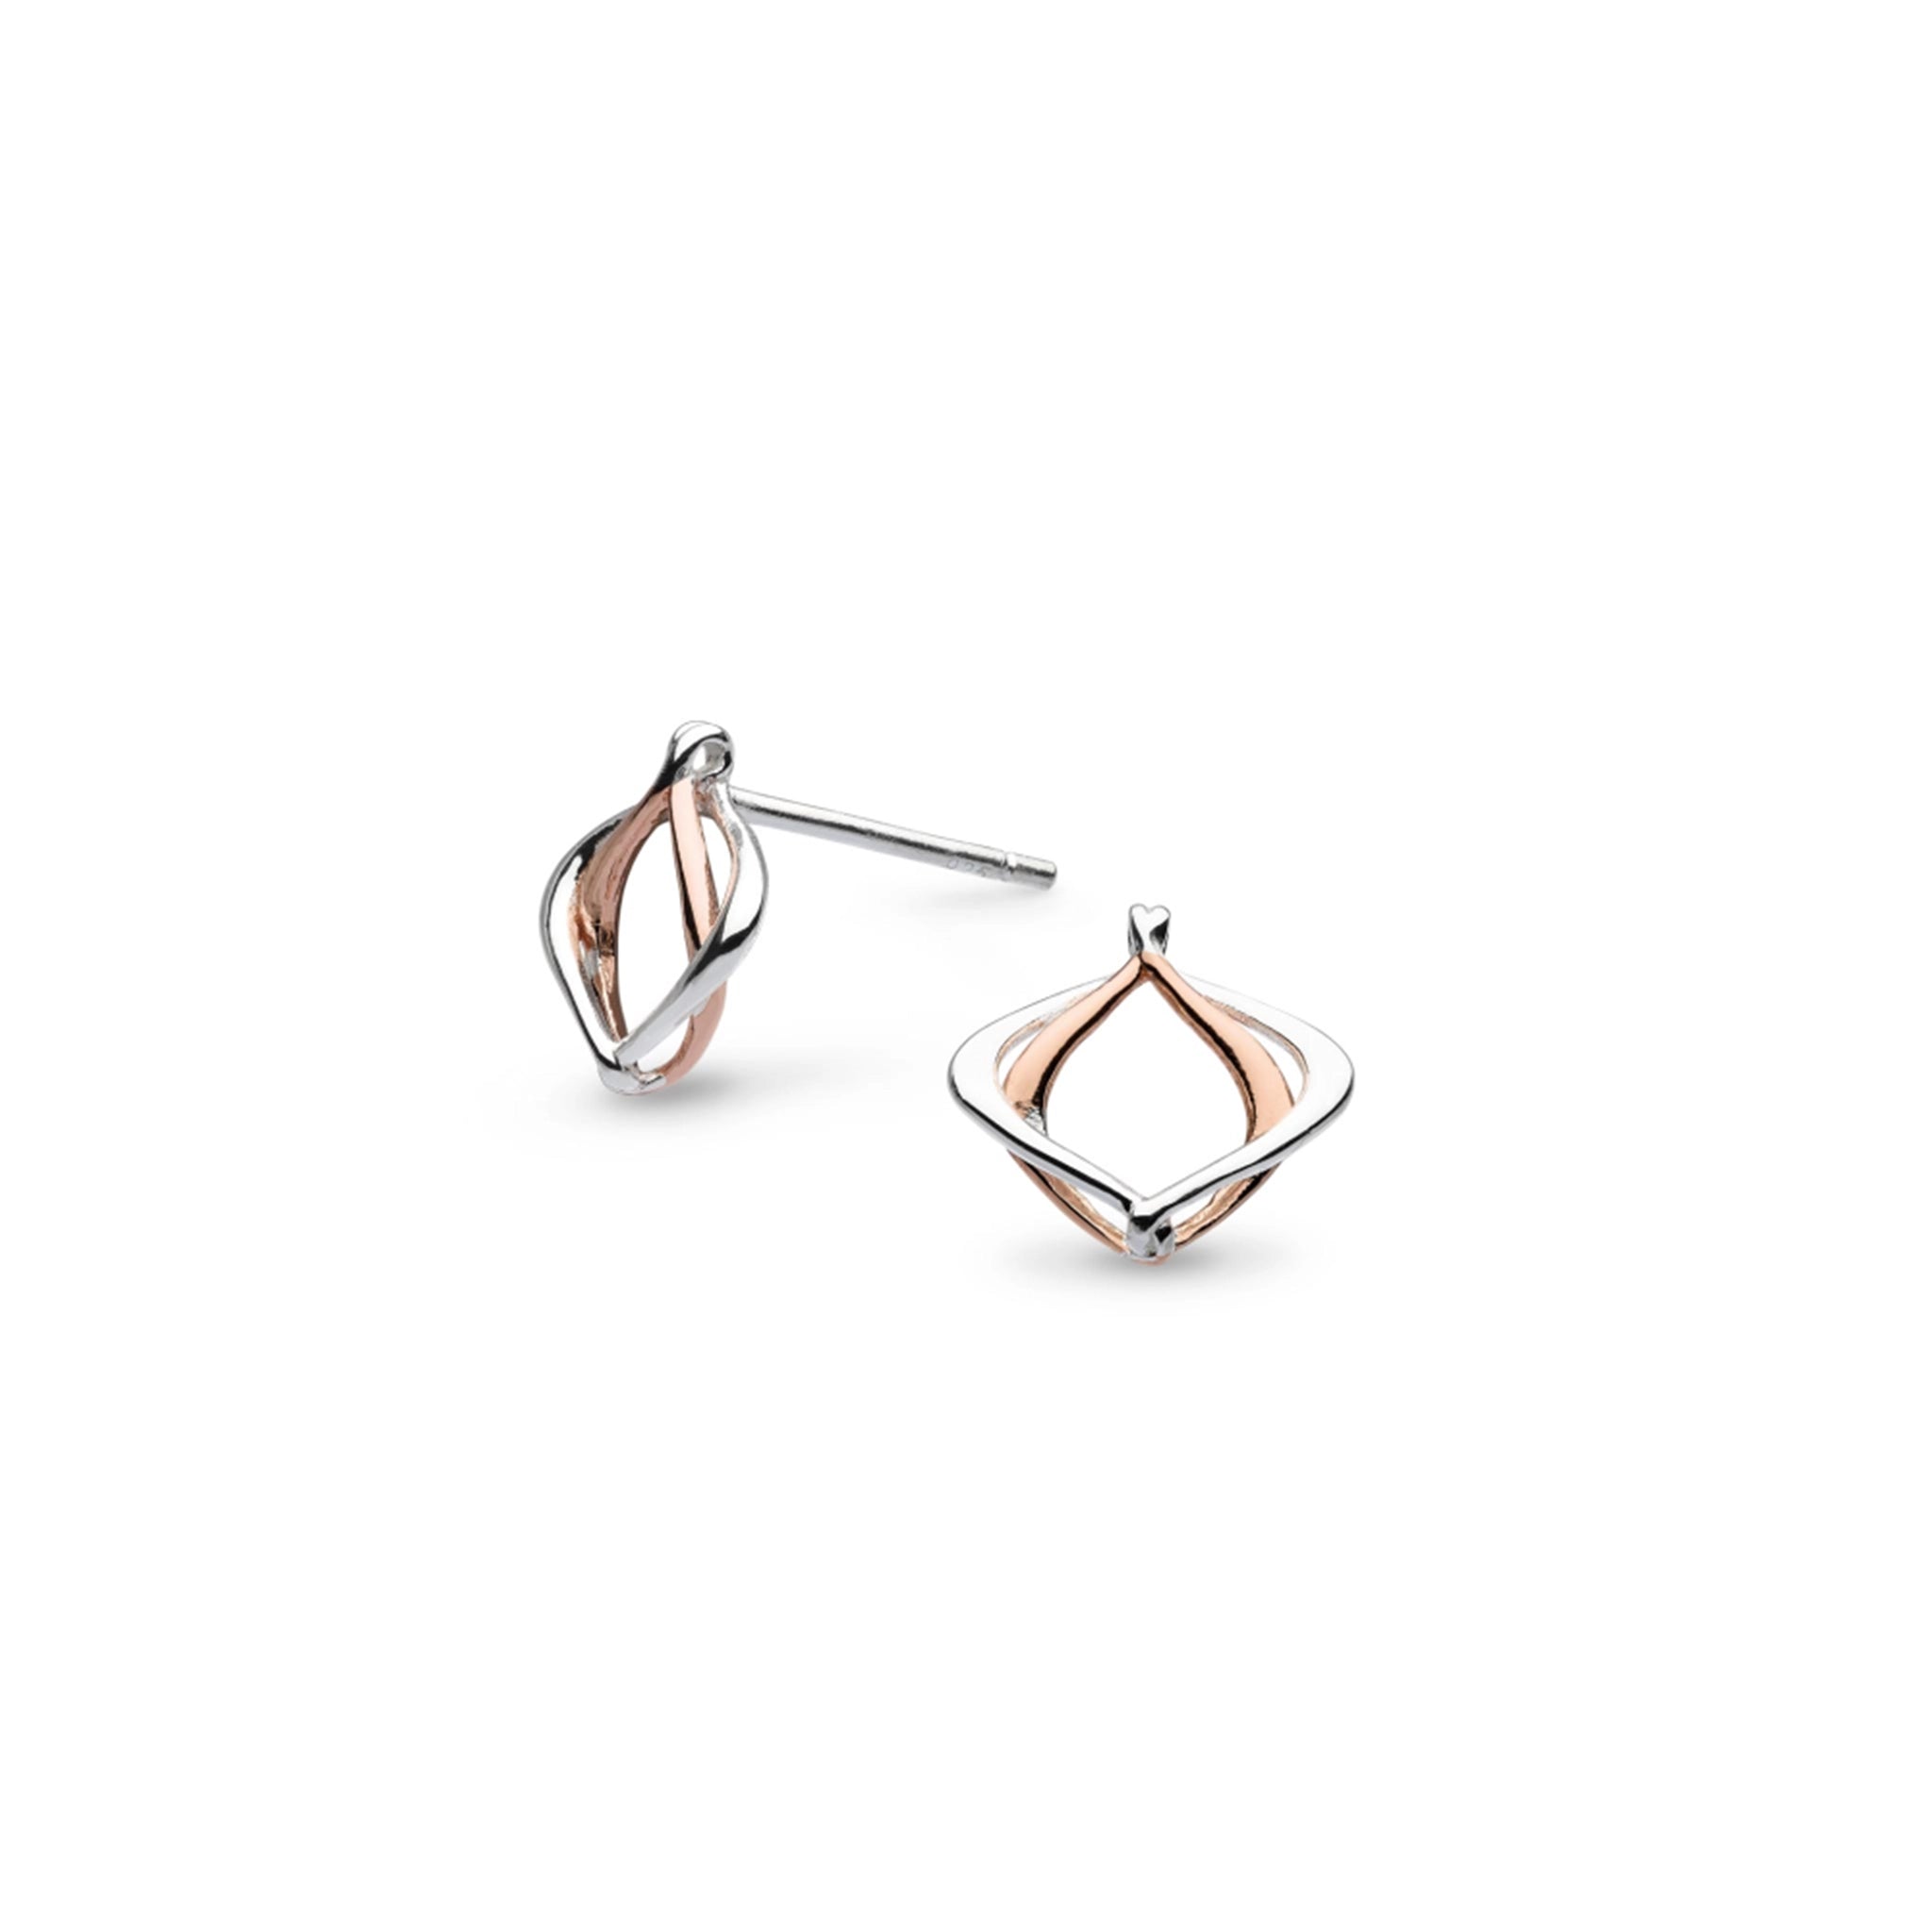 Studs with two organic diamond shapes like those found in art nouveau designs, one in rose gold